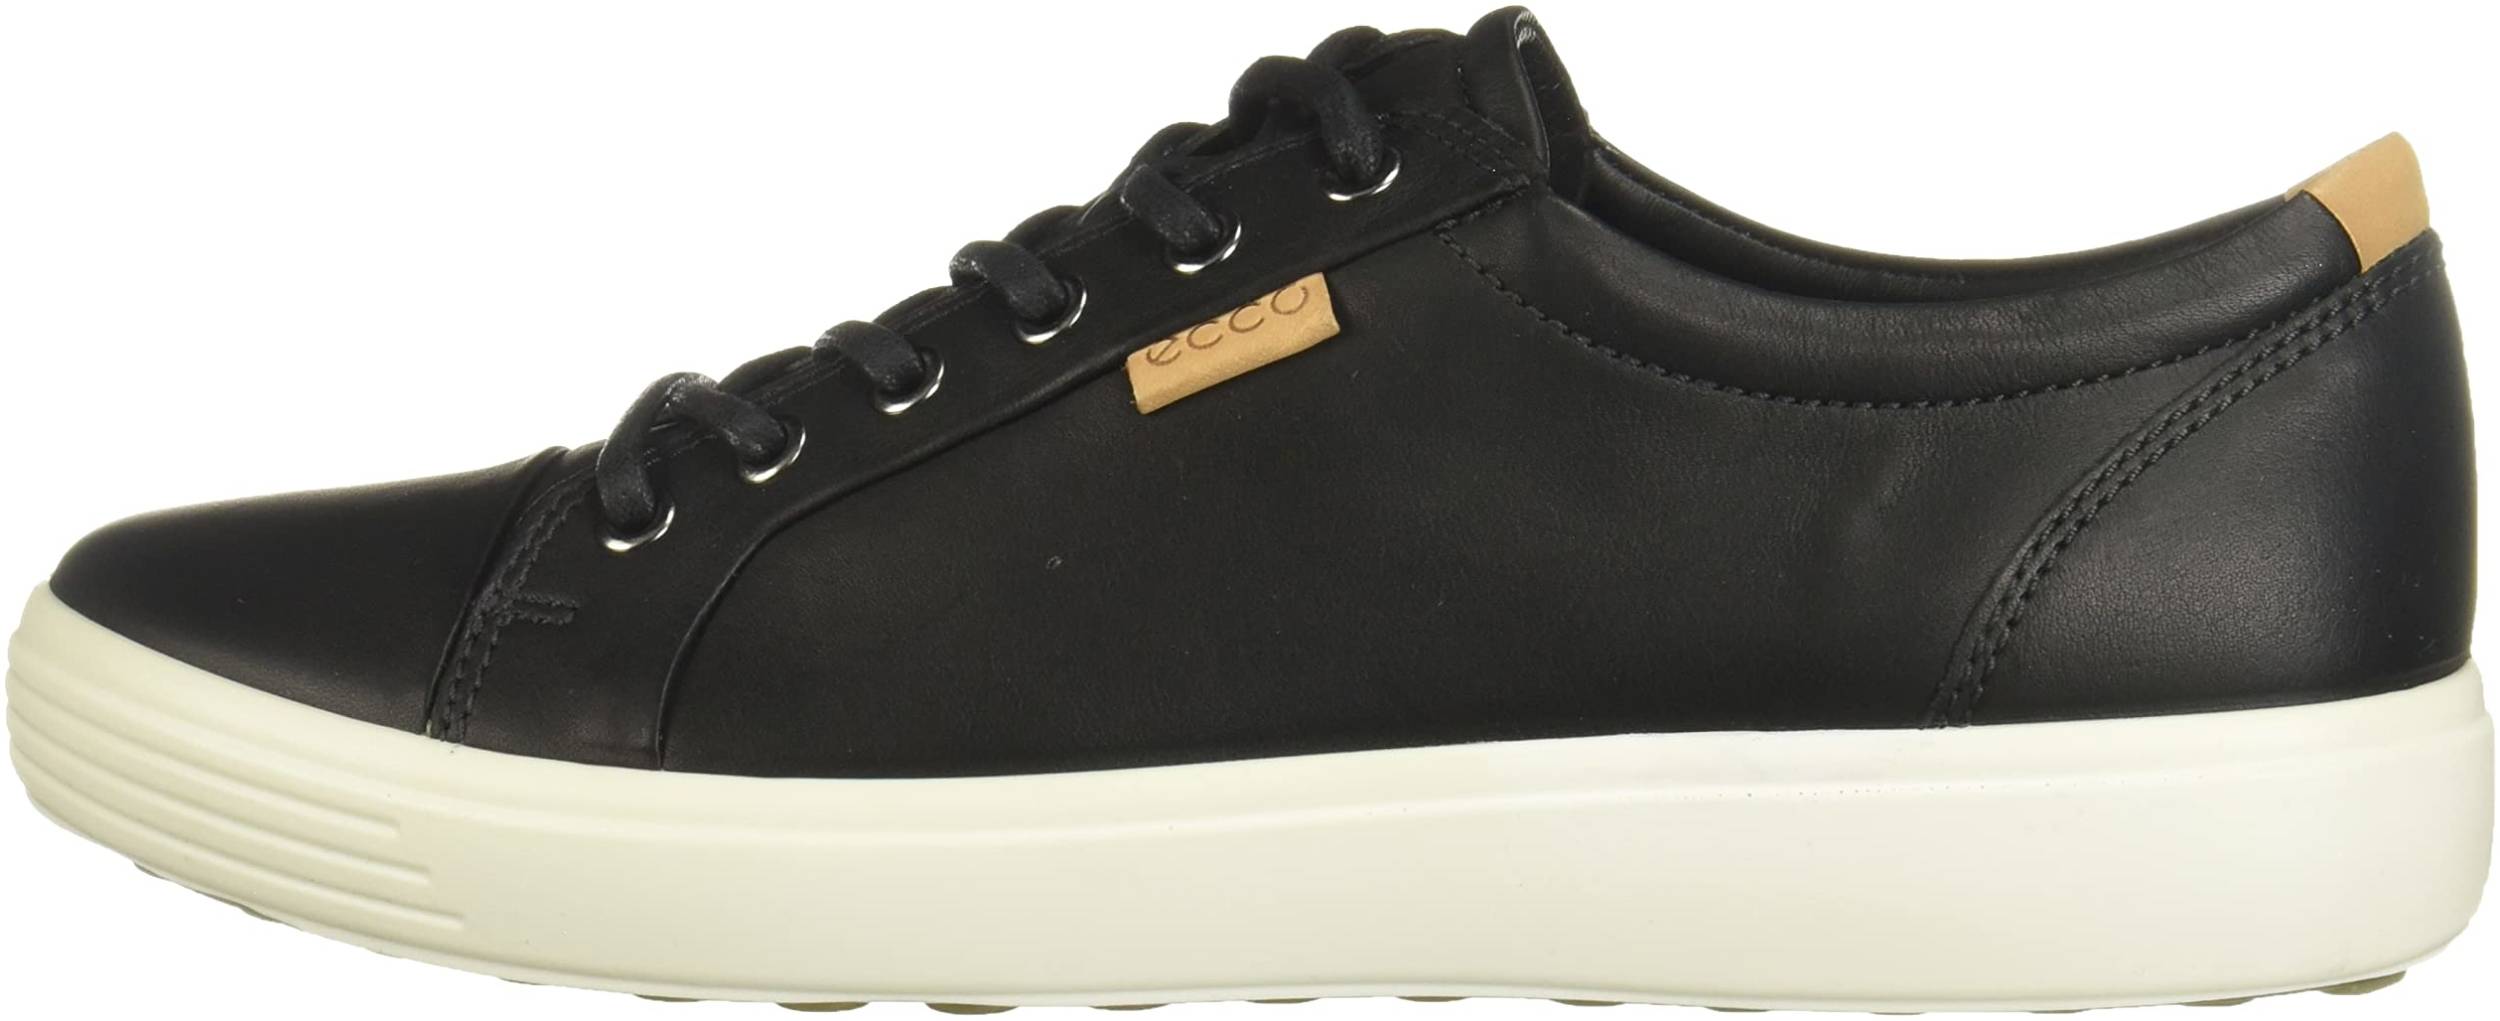 ECCO Soft 7 Sneaker sneakers in 8 colors (only $60) | RunRepeat